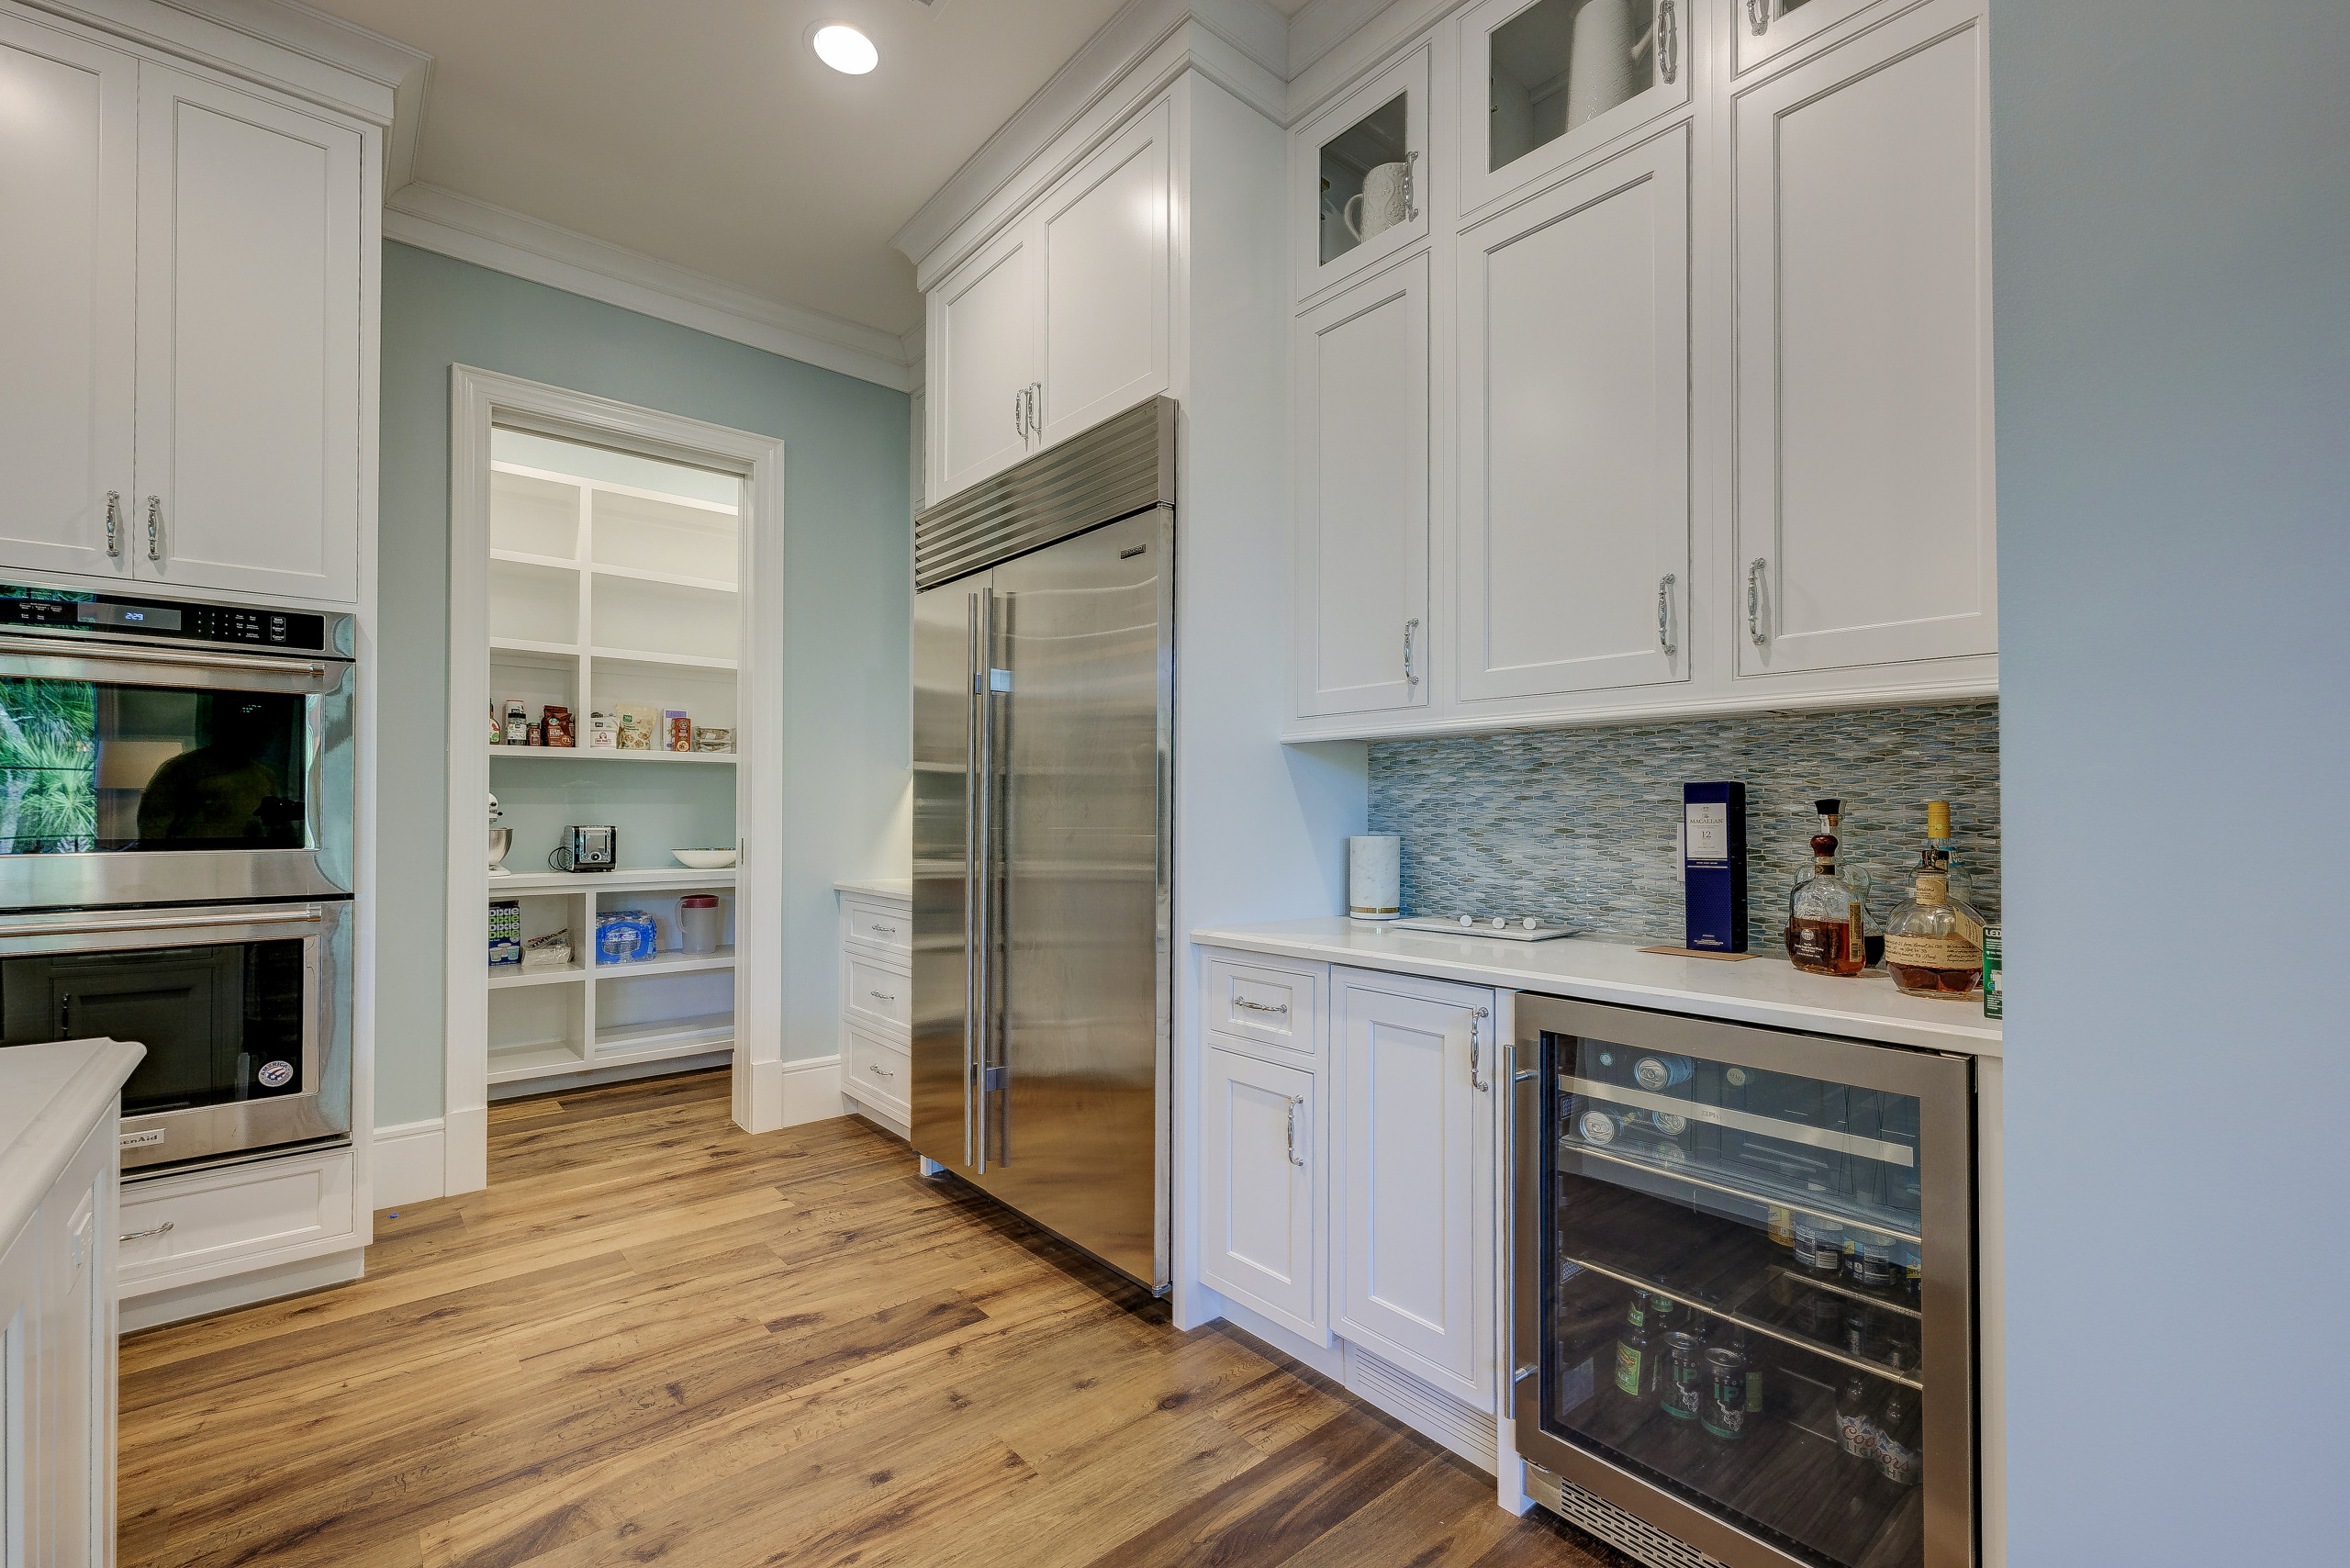 A view of the pantry, refrigerator and wine cooler